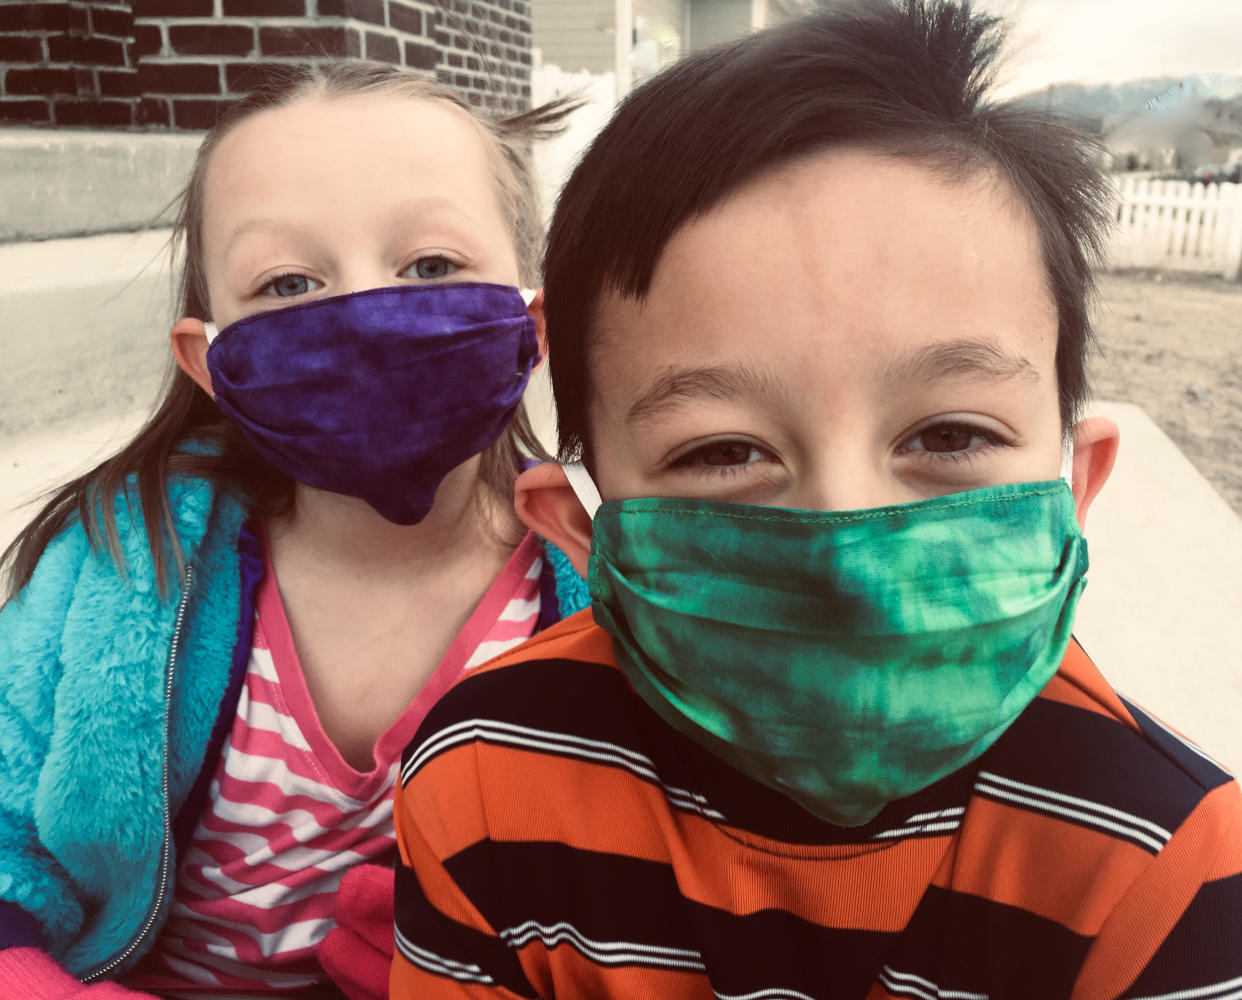 Two children, a Caucasian boy and a Caucasian girl, sitting outside wearing fabric home-made face masks to cover their nose and mouth. You can see that they are smiling beneath their masks.